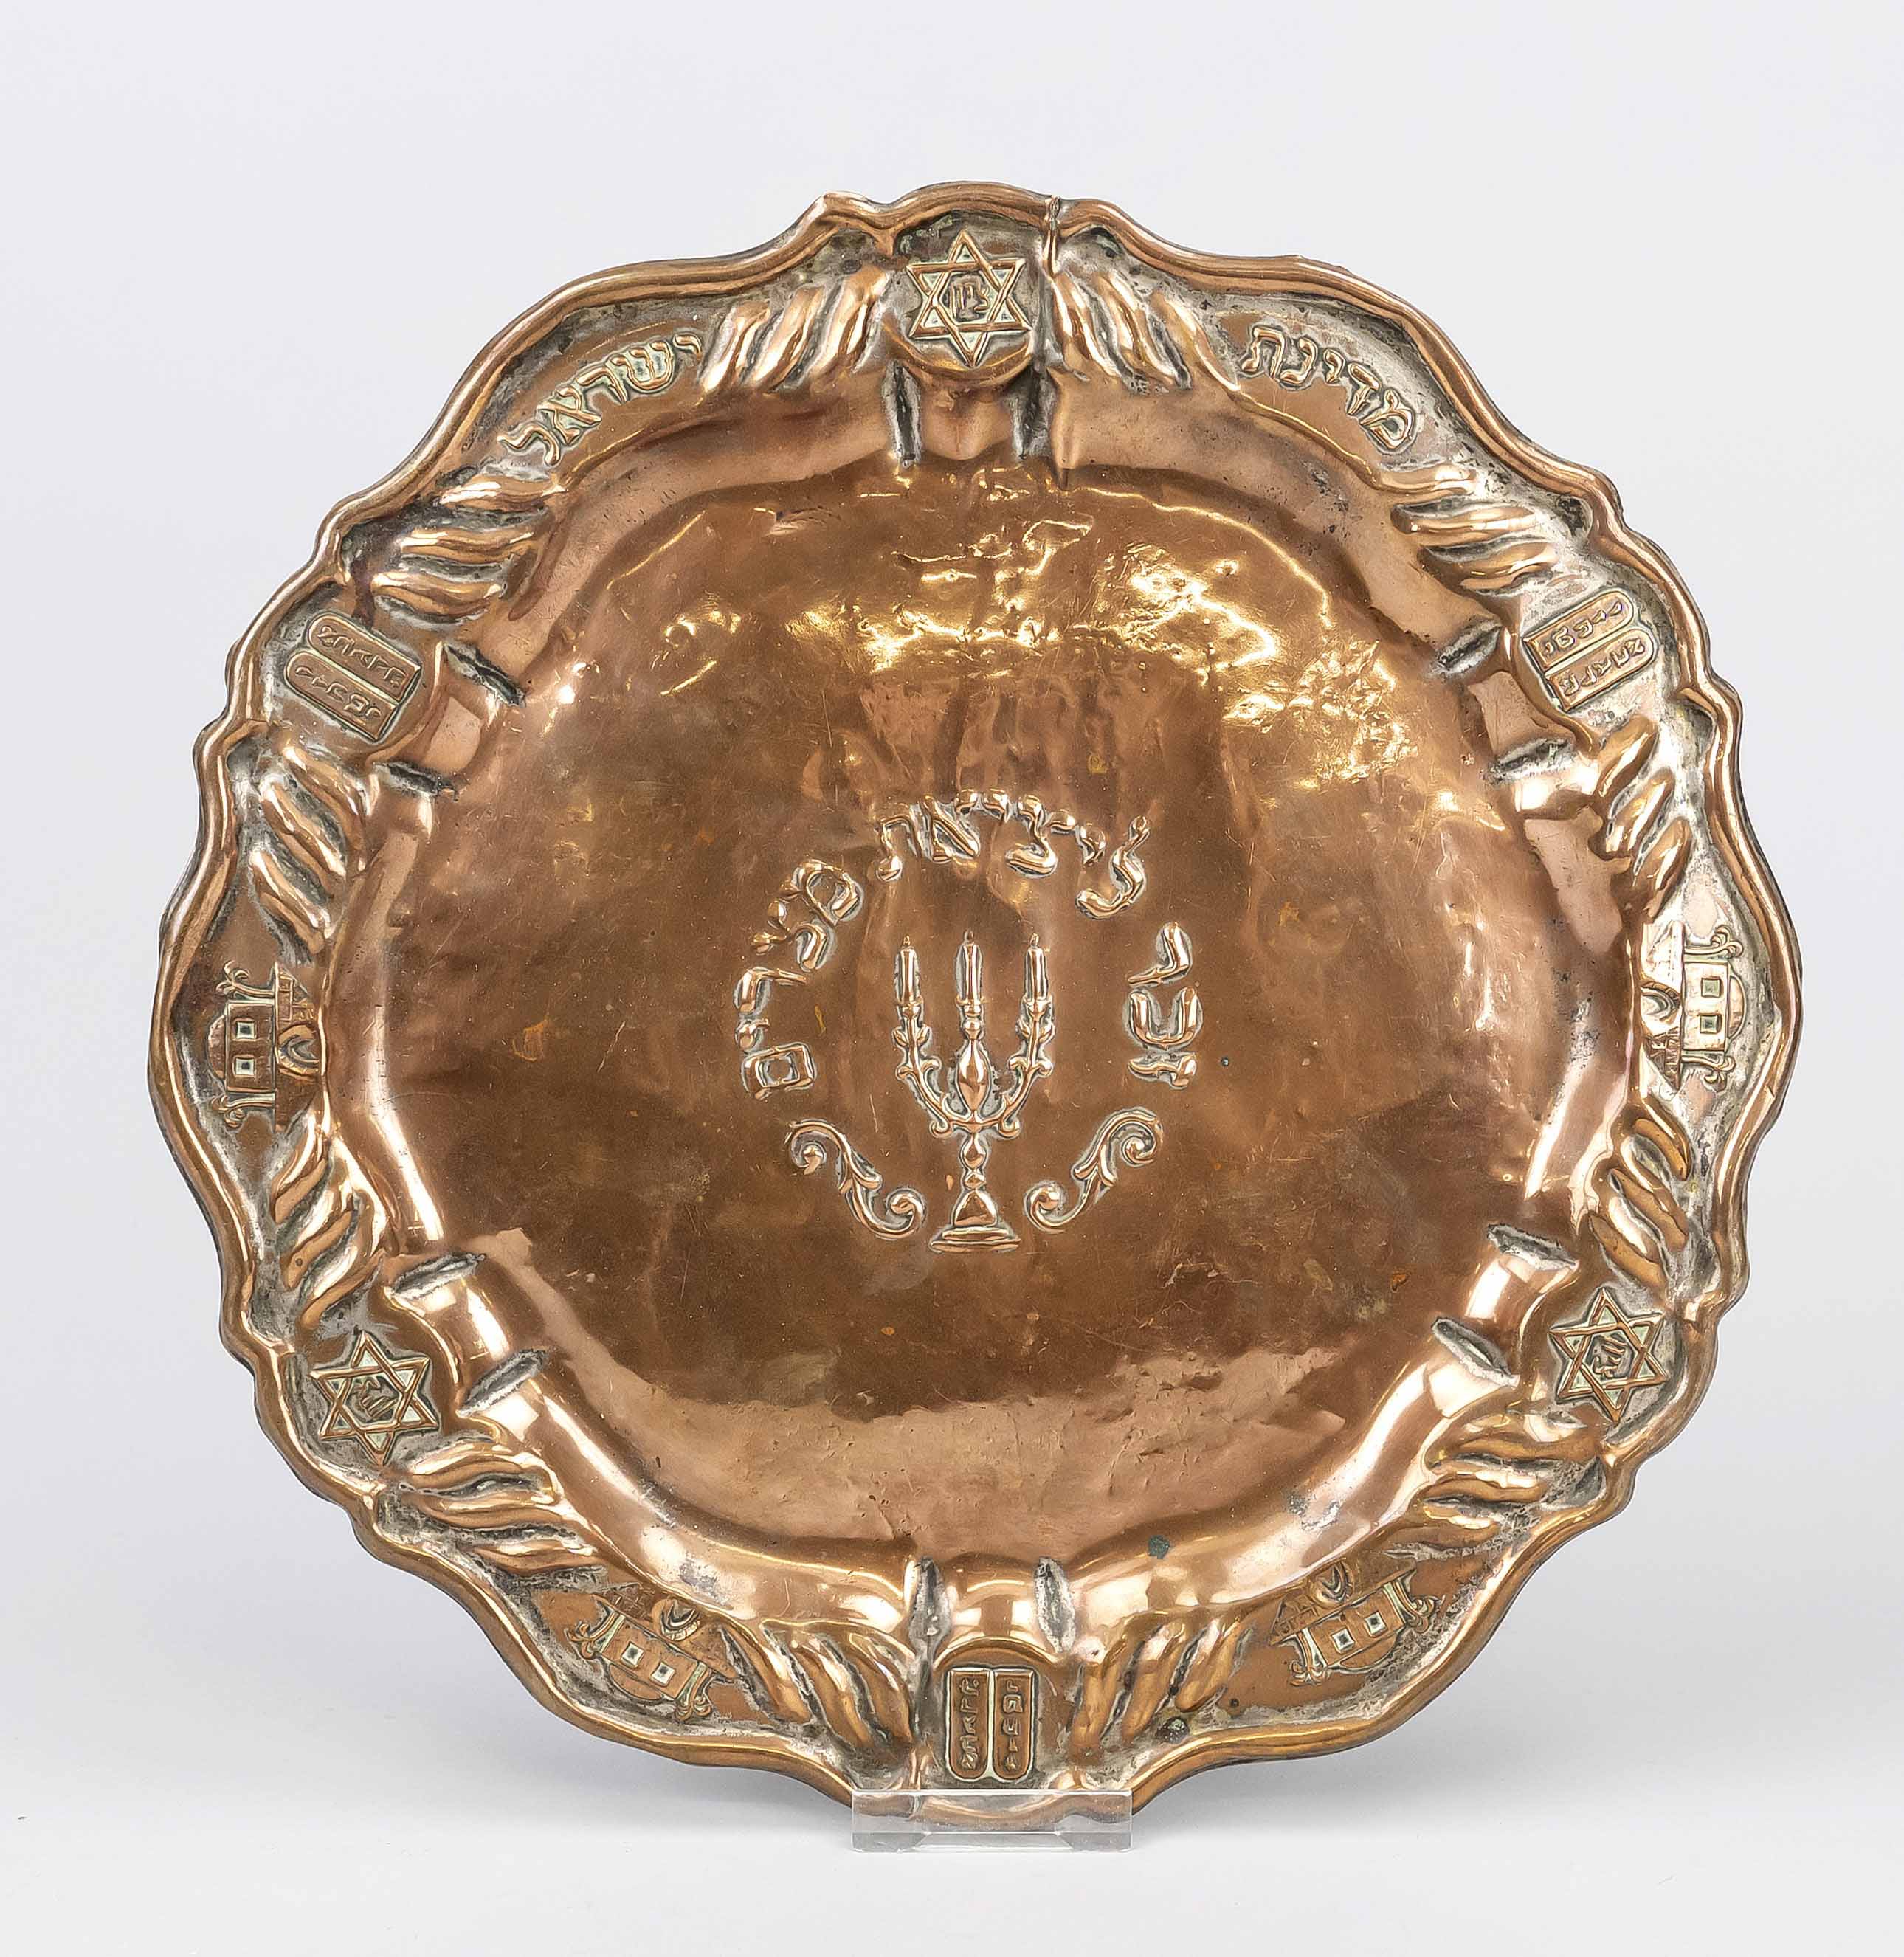 Judaica plate, Israel 20th century, copper. In the mirror a candlestick surrounded by writing, a